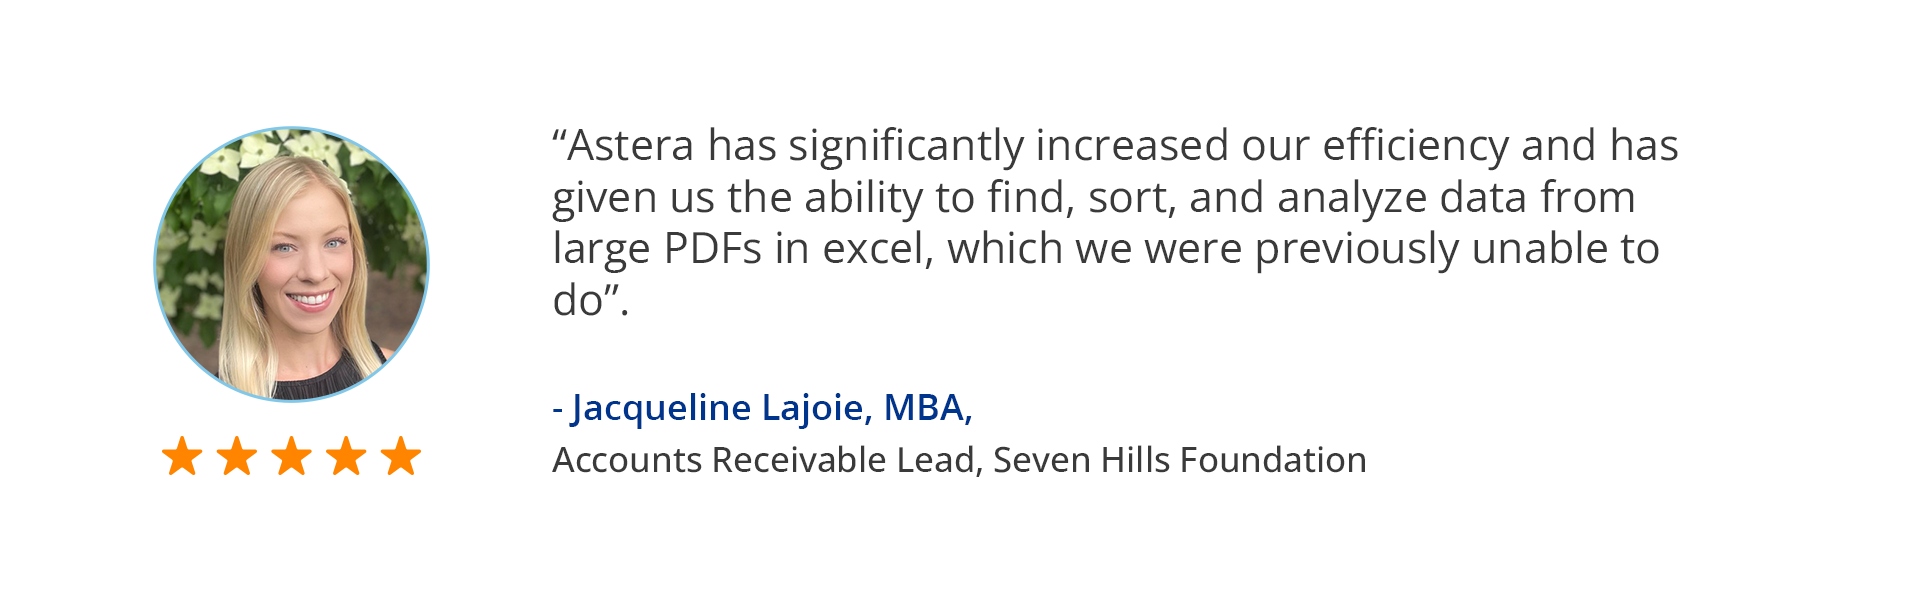 Client testimonial for Astera's data extraction solutions.